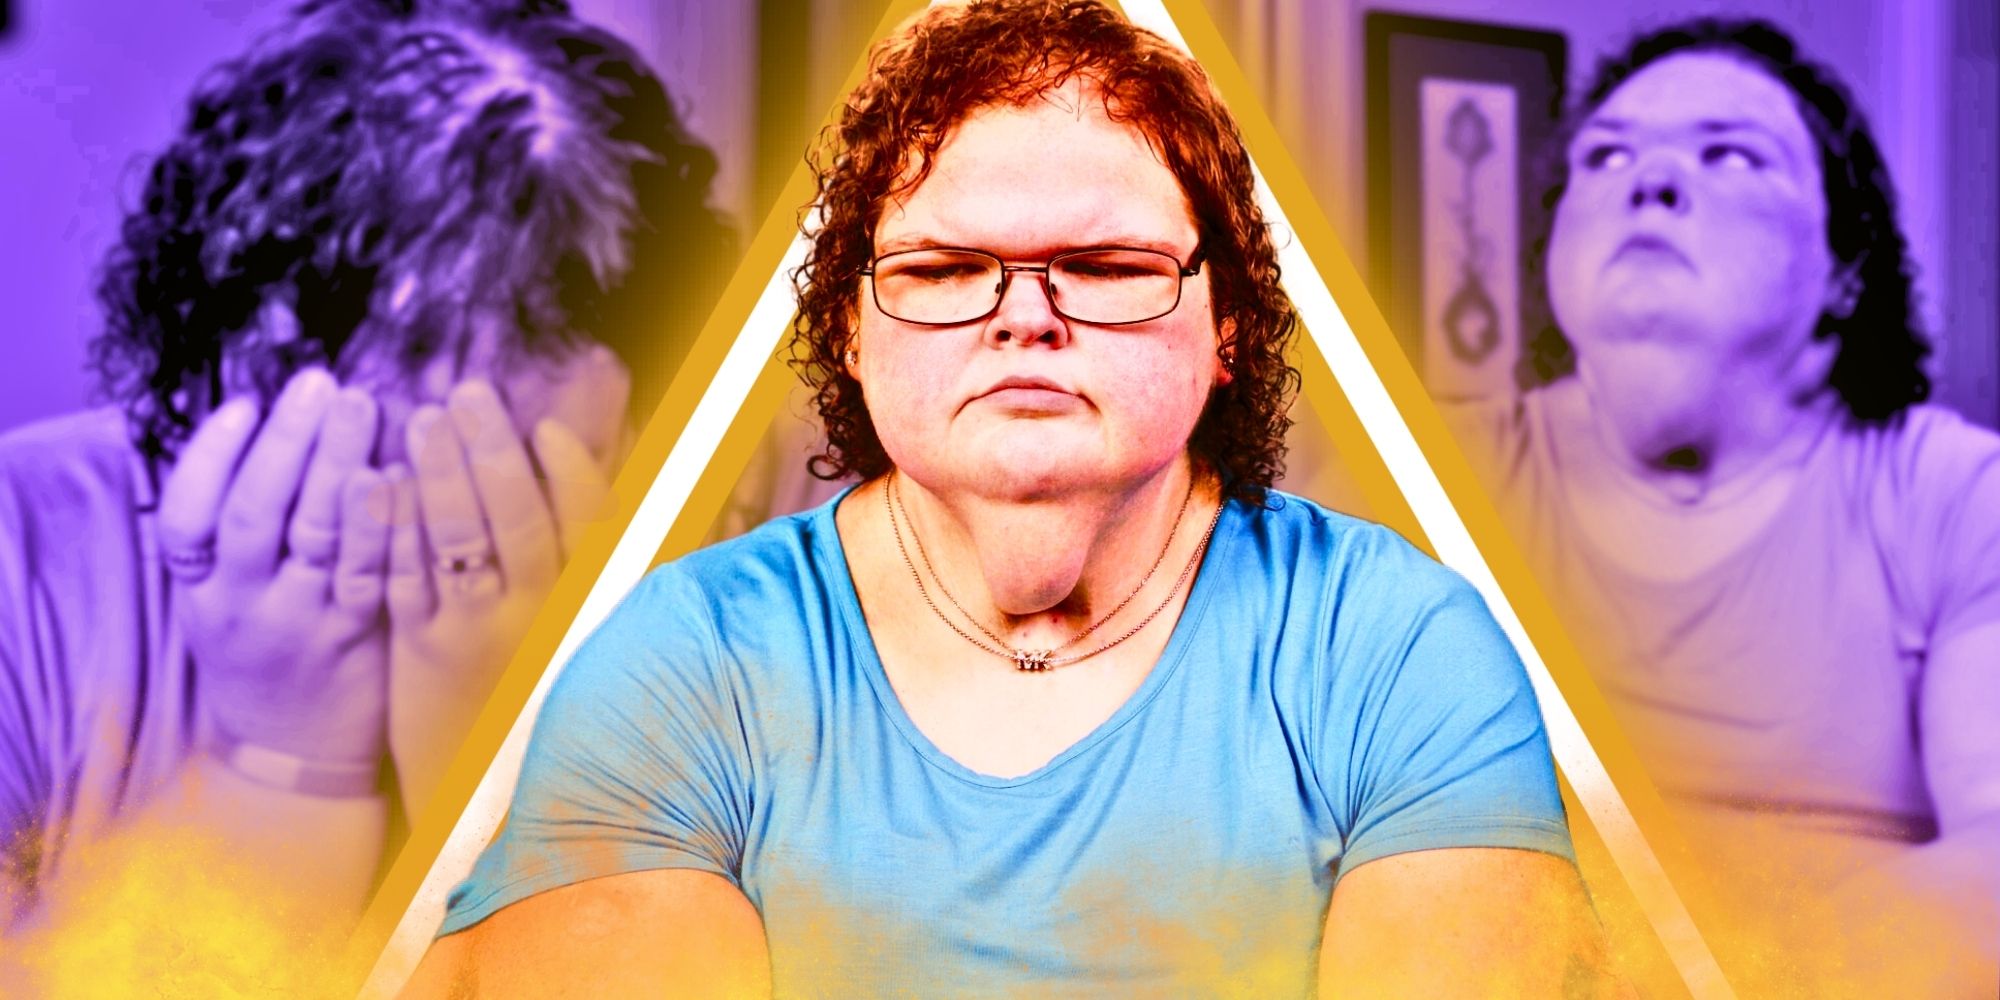 1000-Lb sister Tammy Slaton in a blue t-shirt, arms crossed and an angry look on her face with her crying in the background